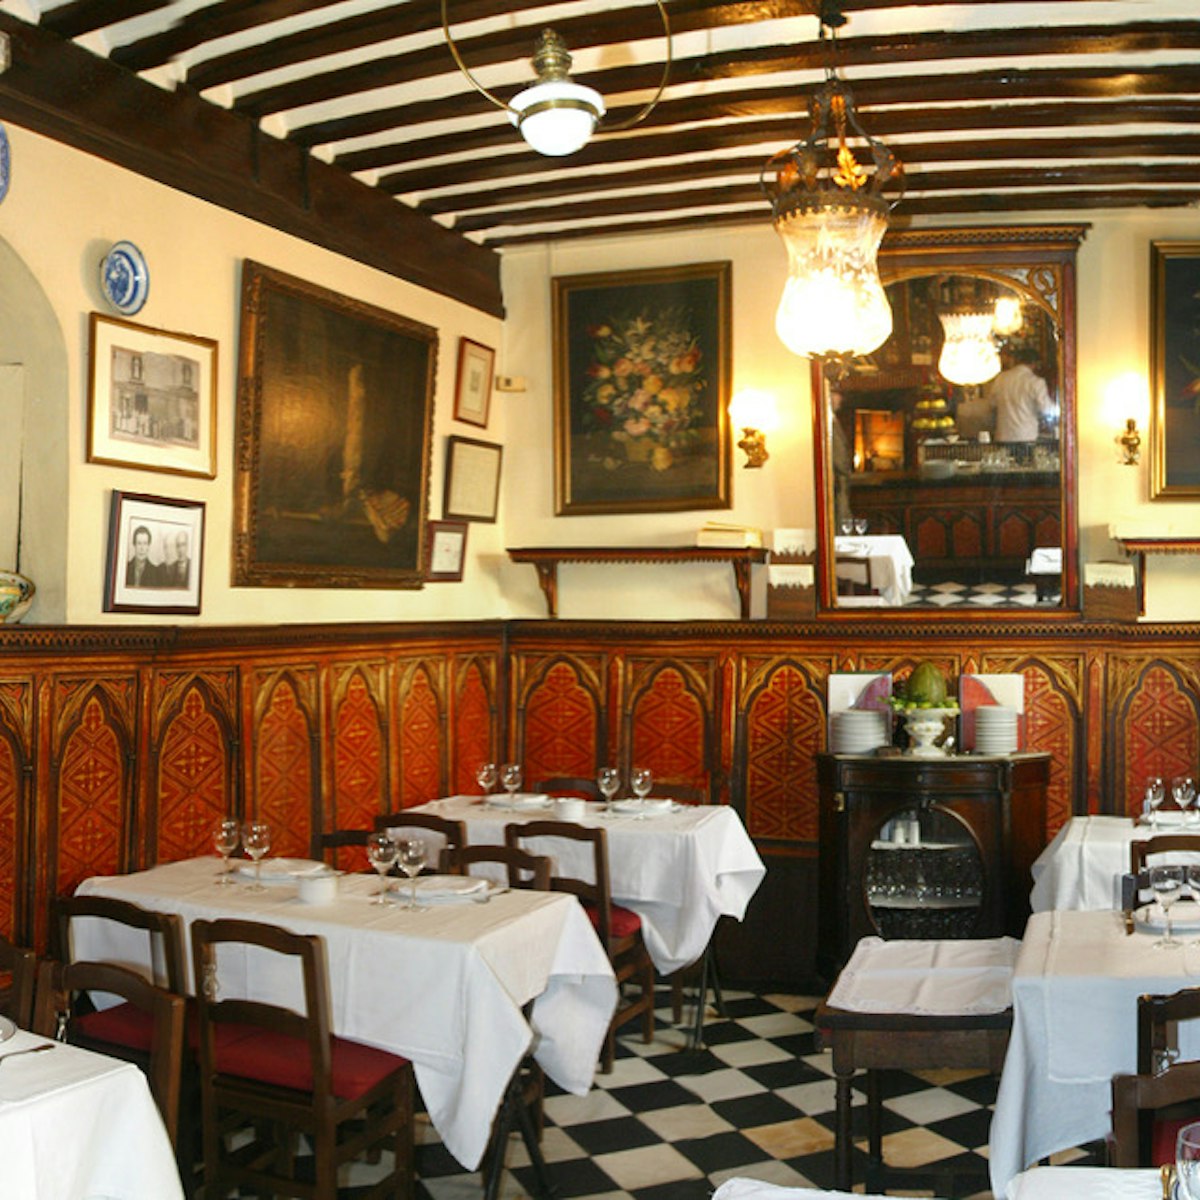 Sobrino de Botín is a Spanish restaurant in Madrid, The artist Francisco de Goya worked in Café Botín as a waiter while waiting to get accepted into the Royal Academy of Fine Arts. The restaurant is mentioned in an Ernest Hemingway novel and the book Fortunata y Jacinta by Benito Pérez Galdós.